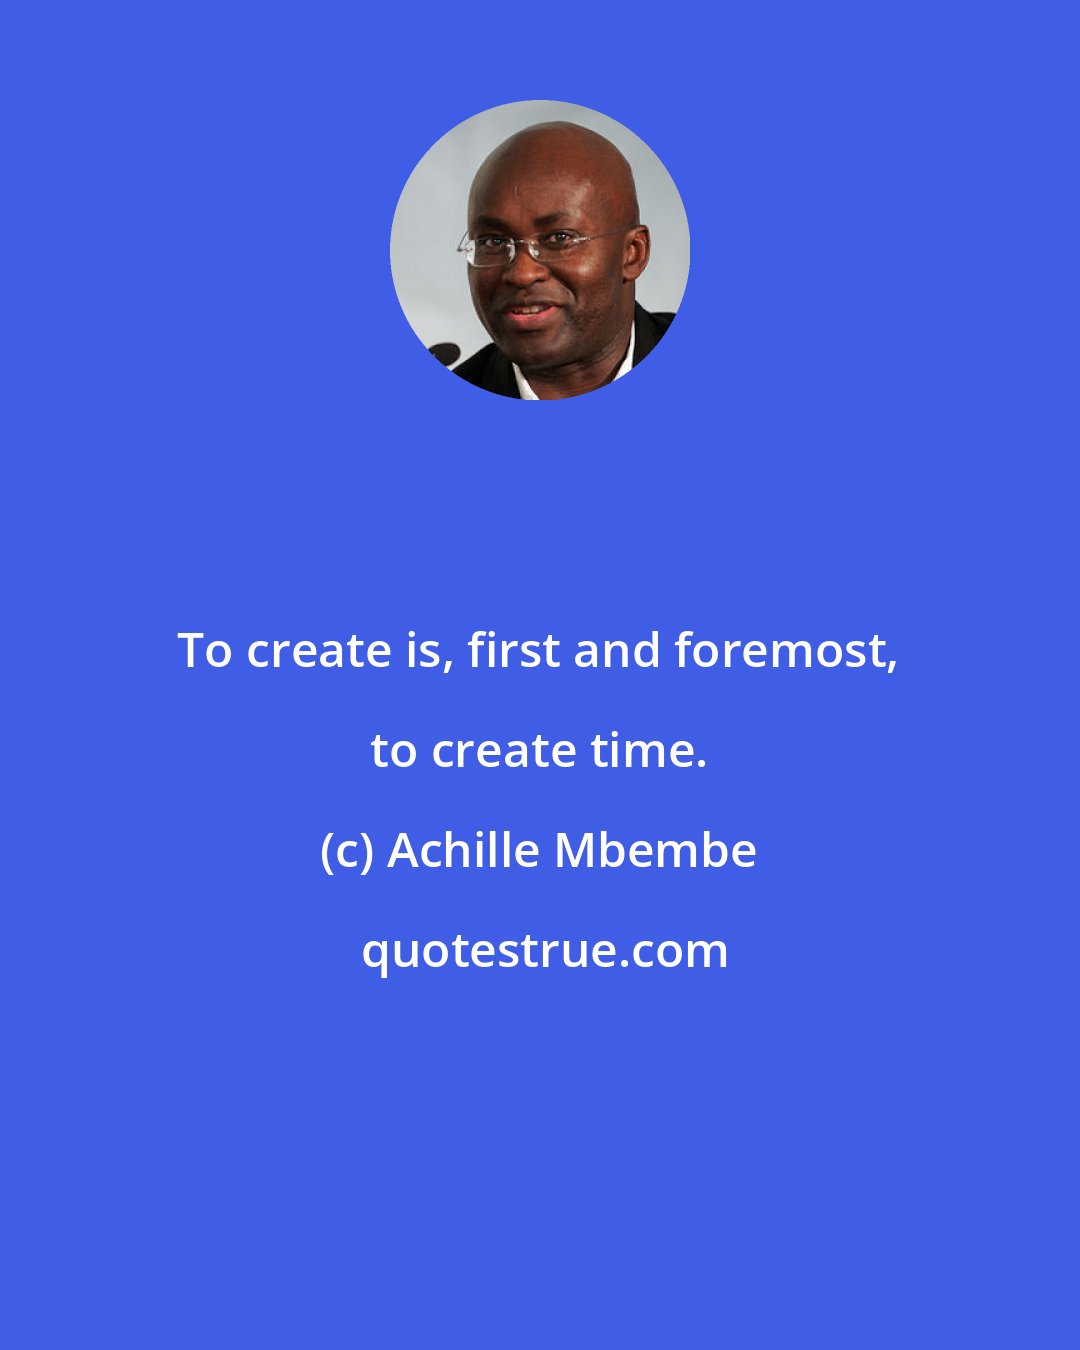 Achille Mbembe: To create is, first and foremost, to create time.